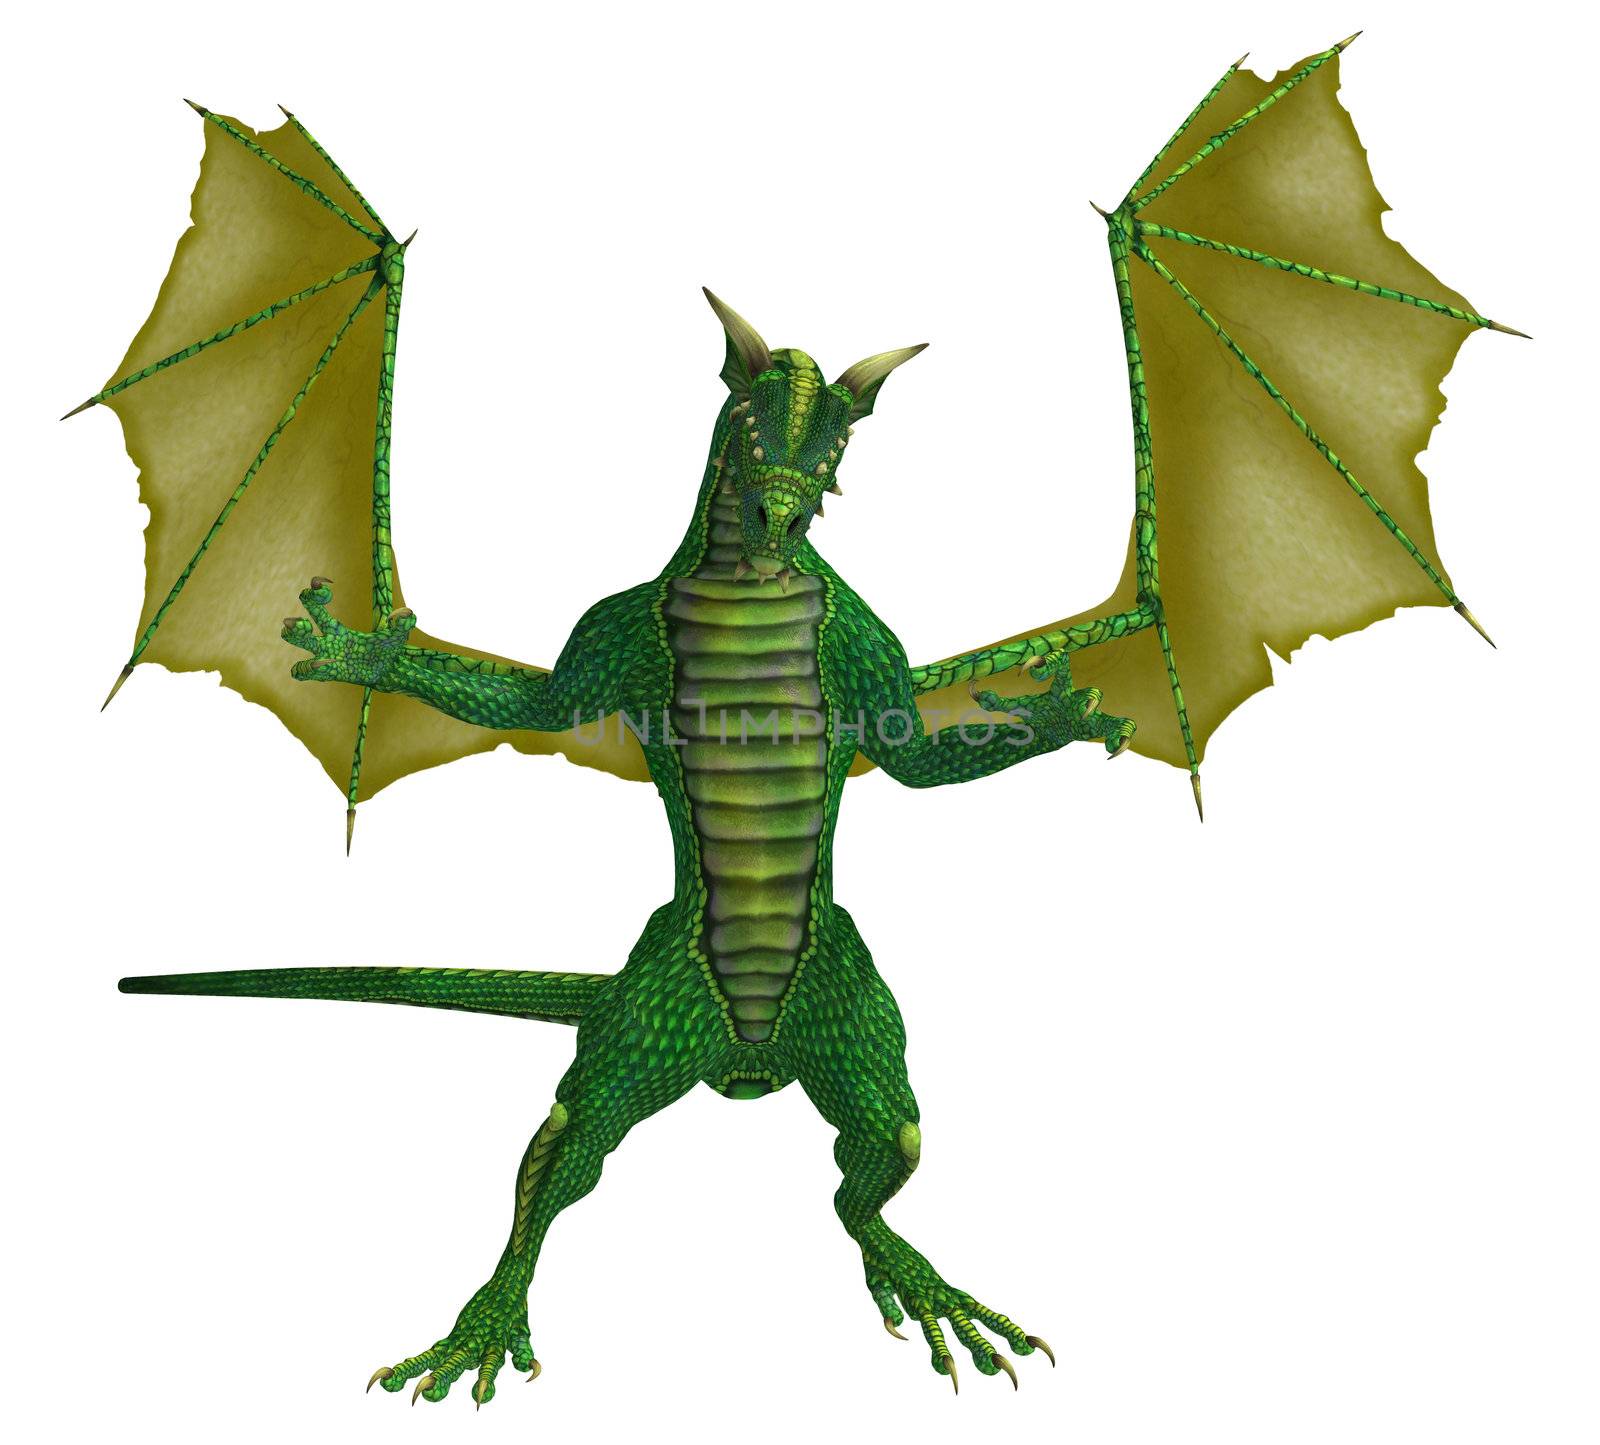 Green yellow dragon standing with wings spread